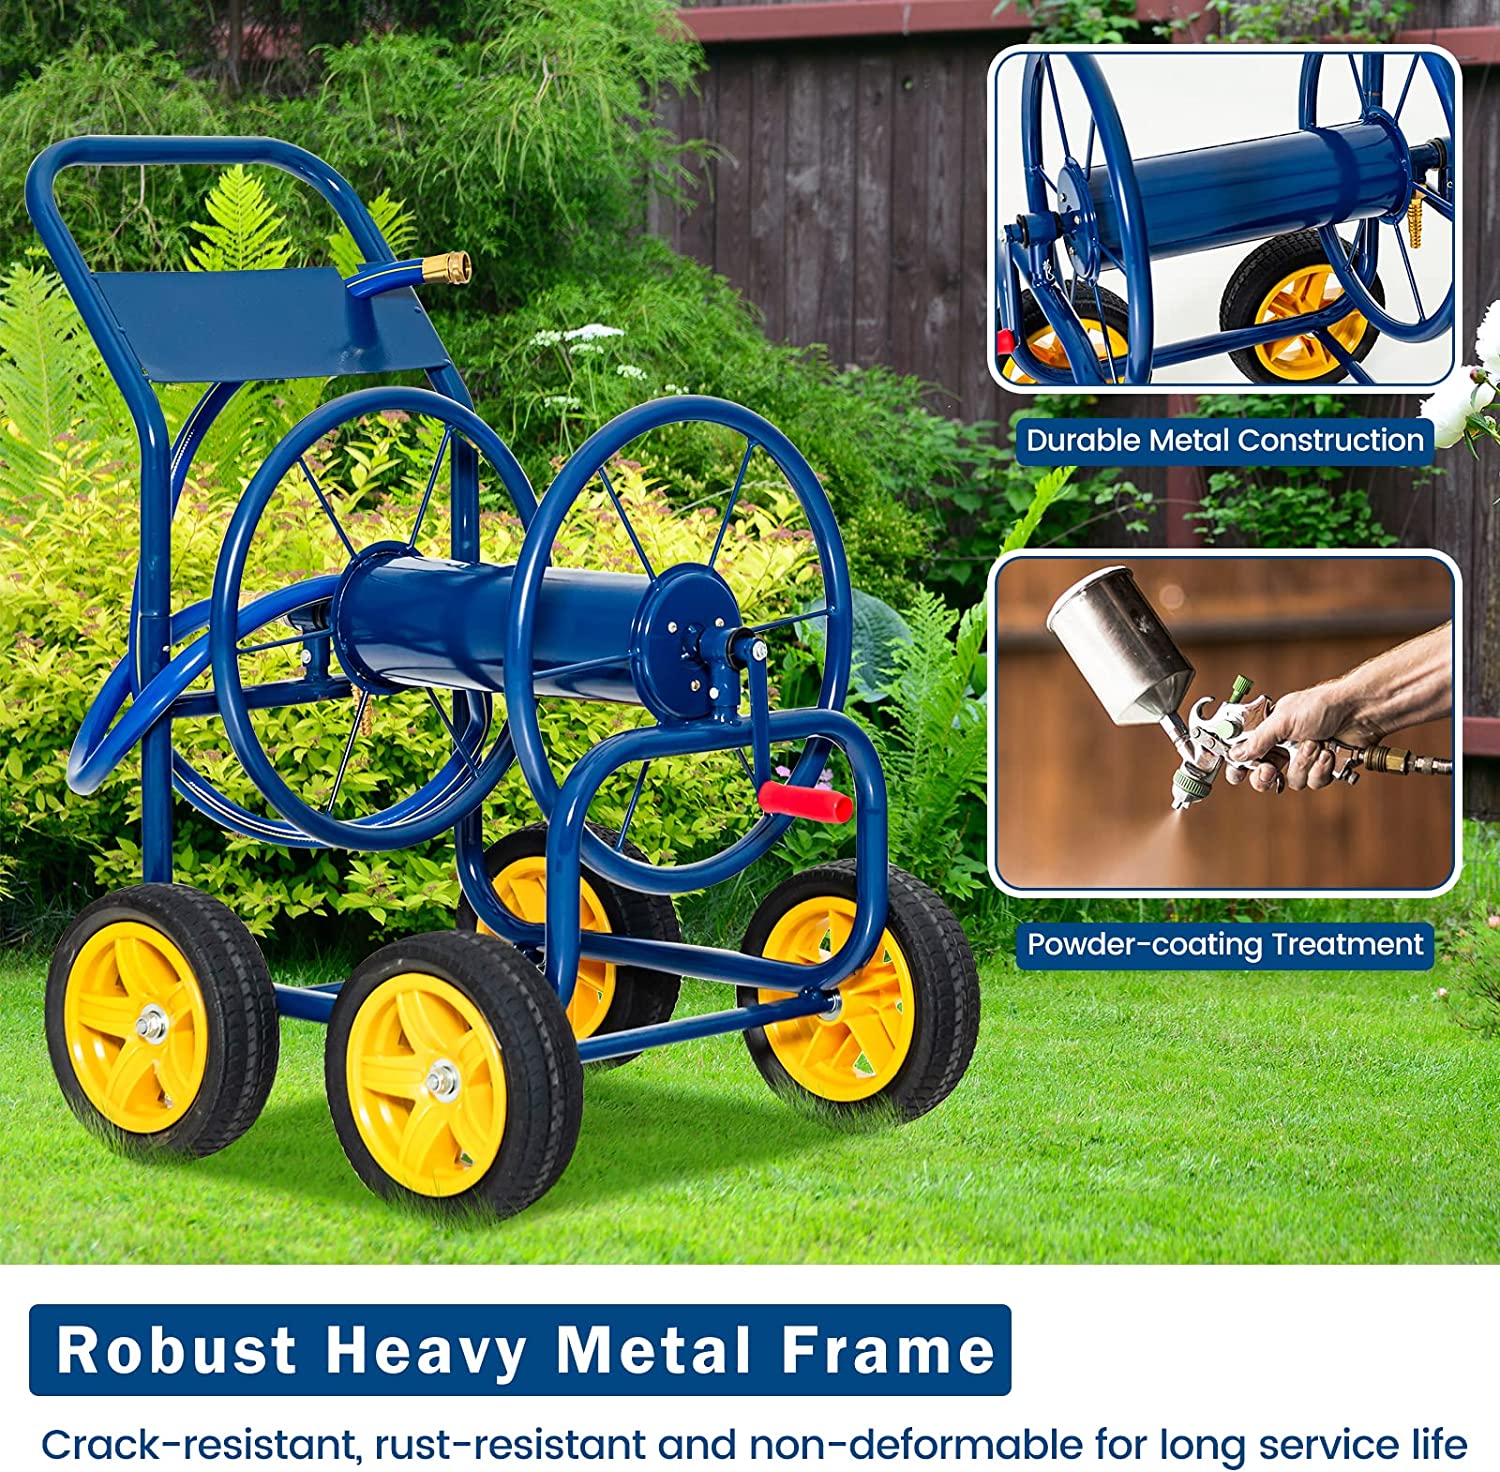 Chairliving Portable Garden Hose Reel Cart Water Hose Holder with Non-slip Grip and 4 Wheels for Lawn Yard Watering